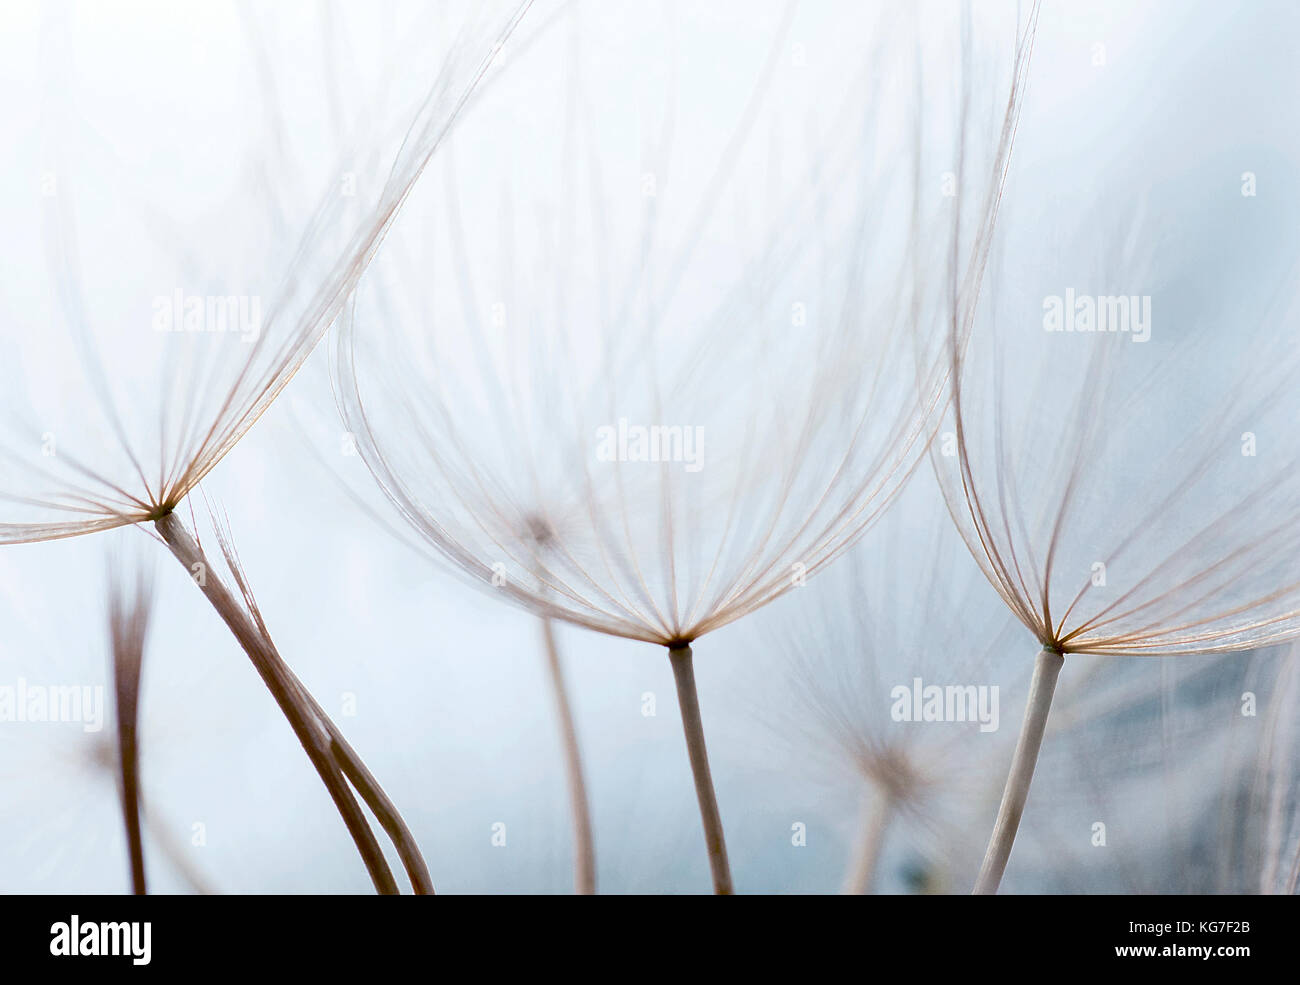 Close up macro image of dandelion seed heads with delicate lace-like patterns, on the Greek island of Kefalonia. Stock Photo